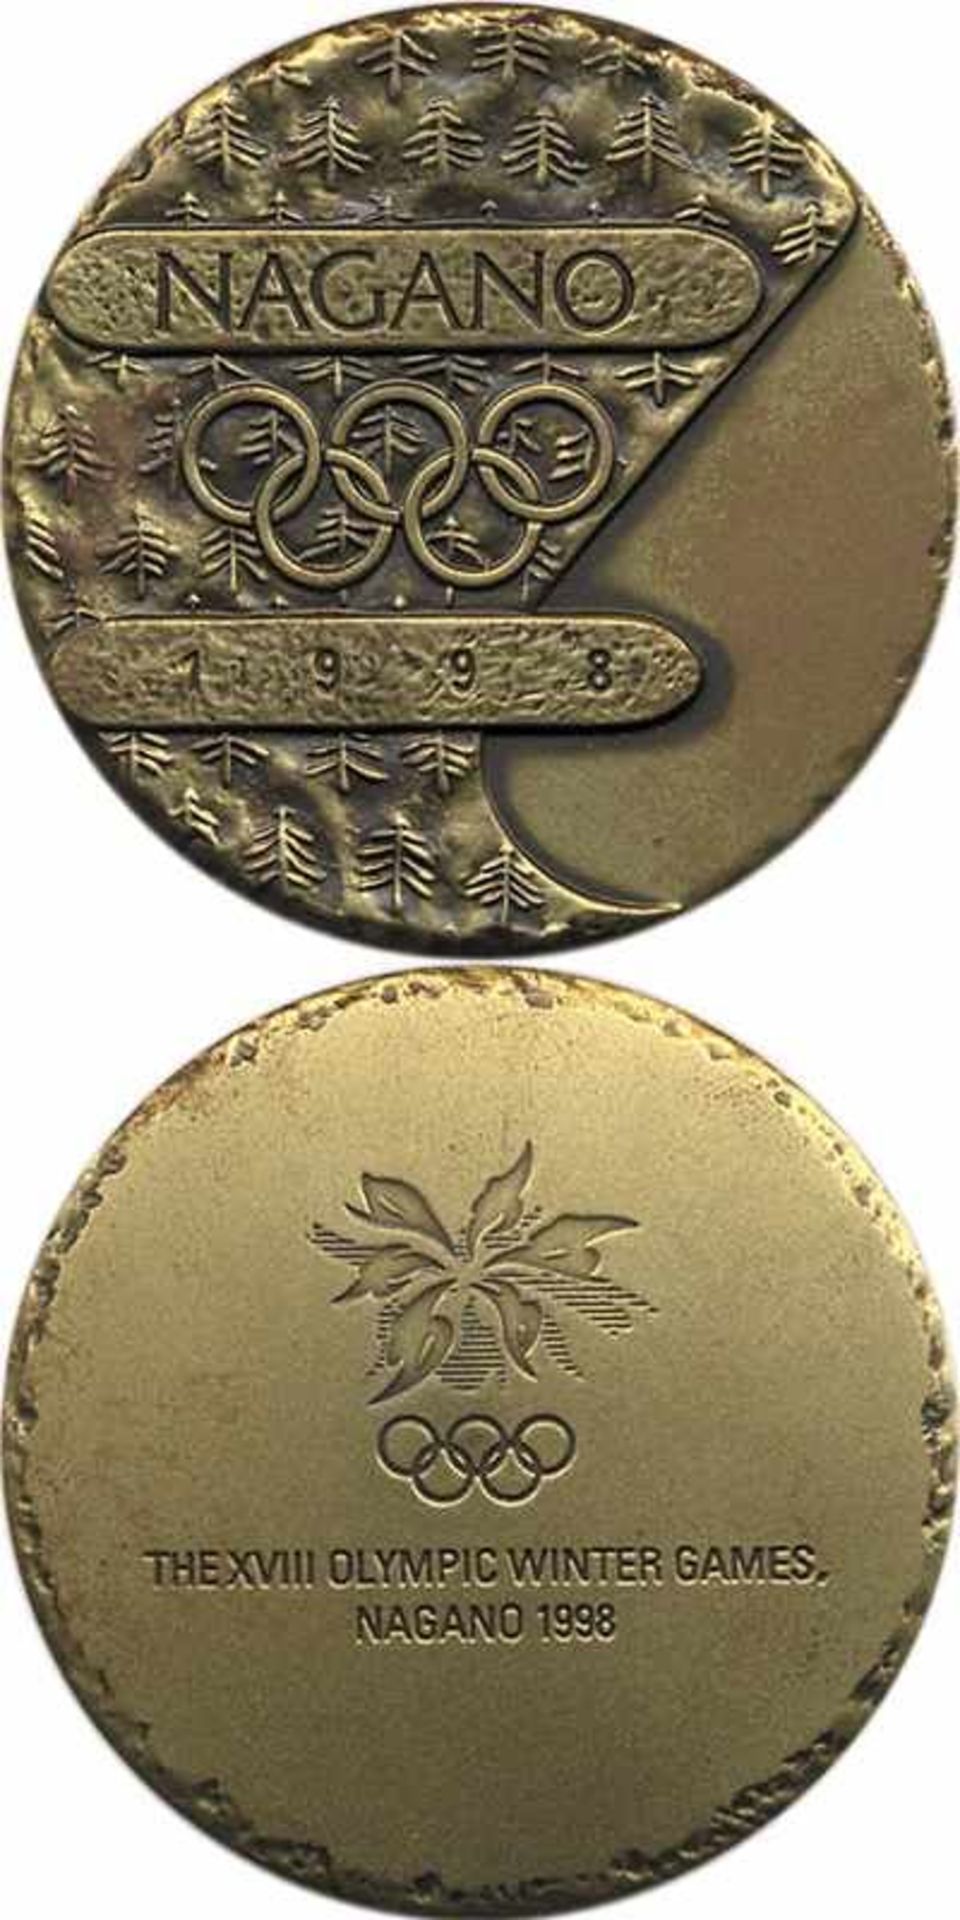 Participation Medal: Olympic Games 1998. - Nagano 1998. Bronze, gold plated, size 6 cm, with